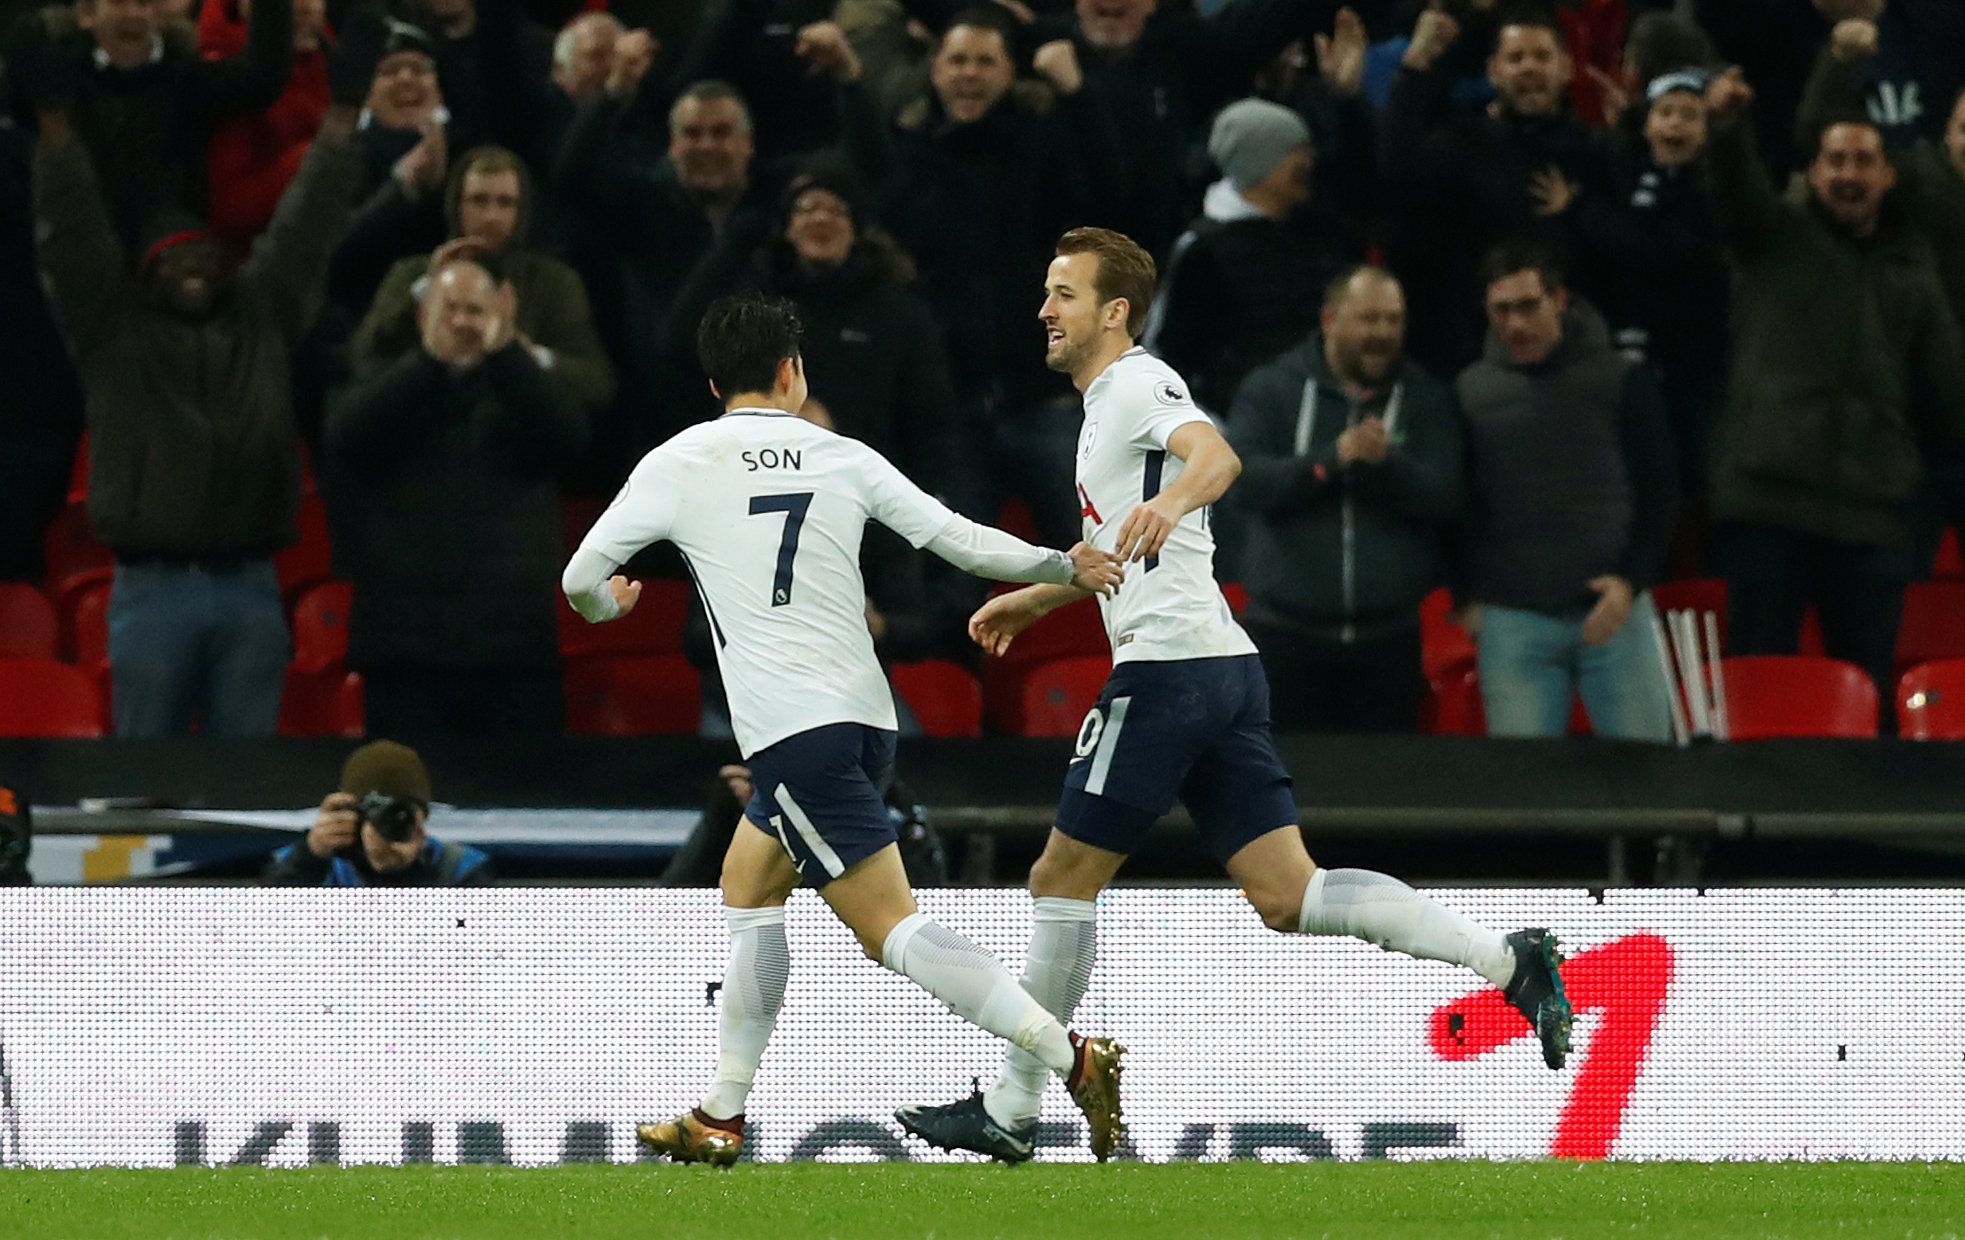 Soccer Football - Premier League - Tottenham Hotspur vs Everton - Wembley Stadium, London, Britain - January 13, 2018   Tottenham's Harry Kane celebrates scoring their second goal with Son Heung-min           Action Images via Reuters/Matthew Childs    EDITORIAL USE ONLY. No use with unauthorized audio, video, data, fixture lists, club/league logos or 